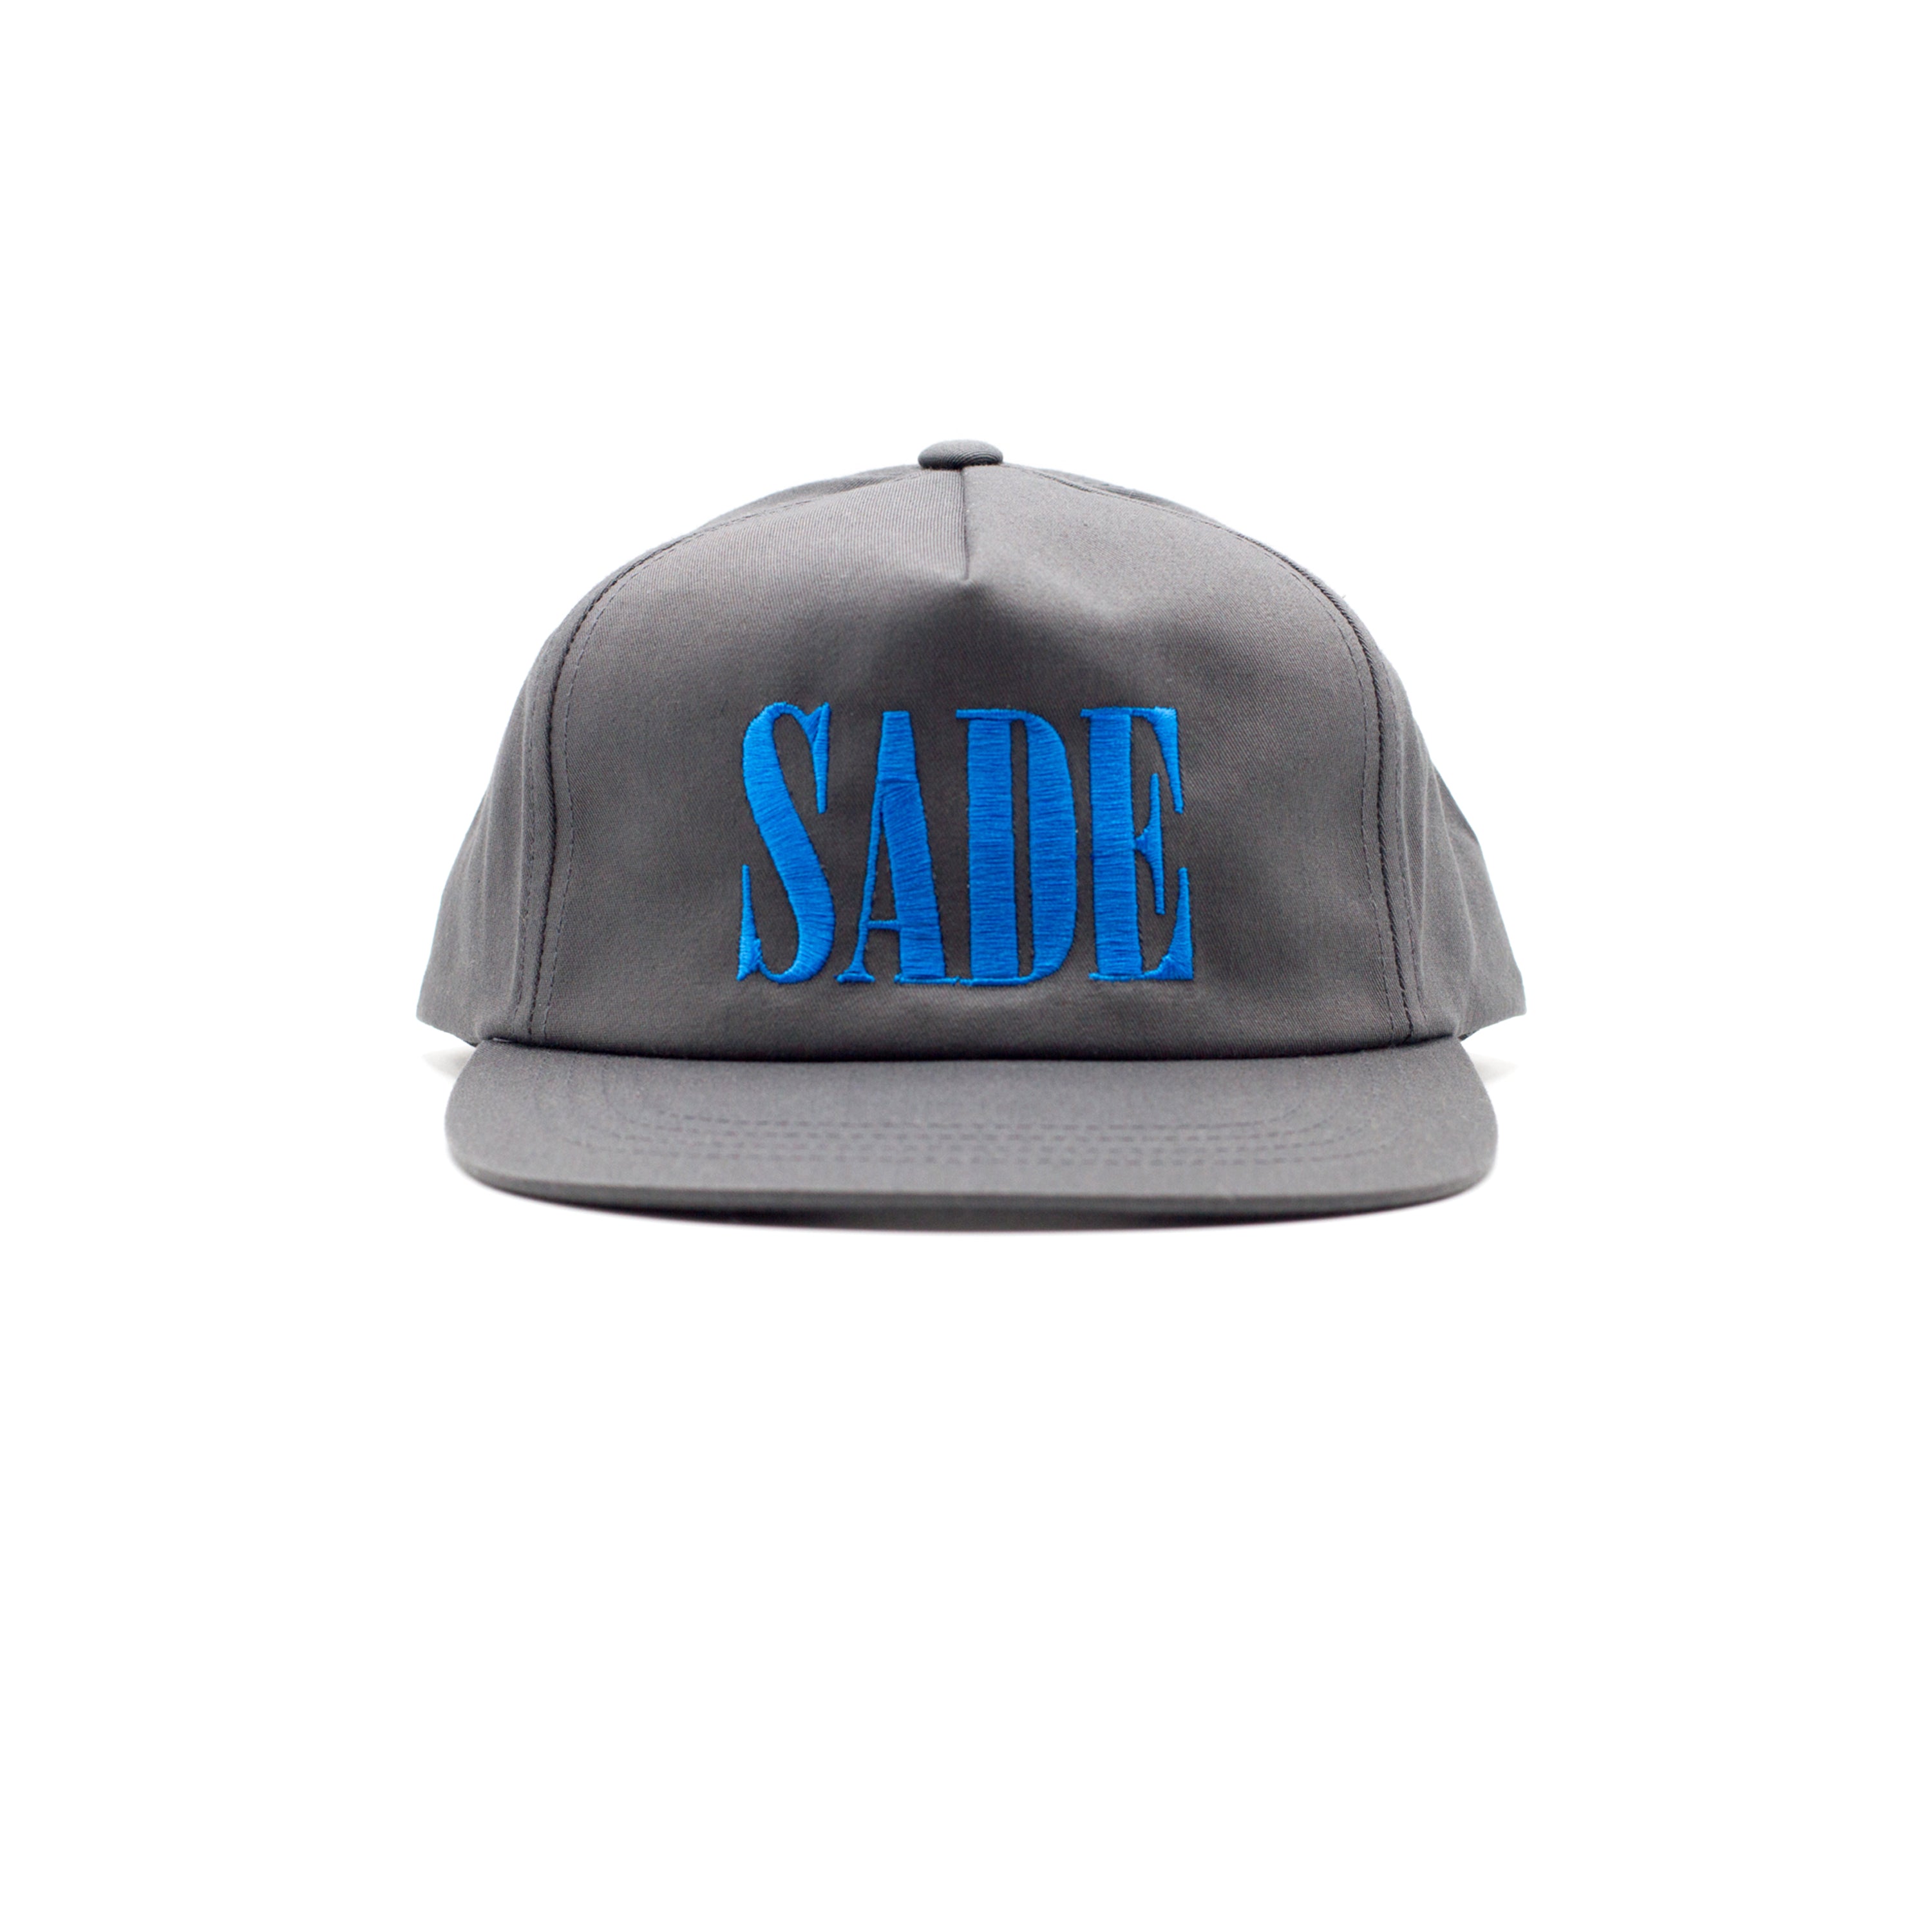 SADE CHARCOAL/BLUE - UNSTRUCTURED 5-PANEL SNAPBACK HAT